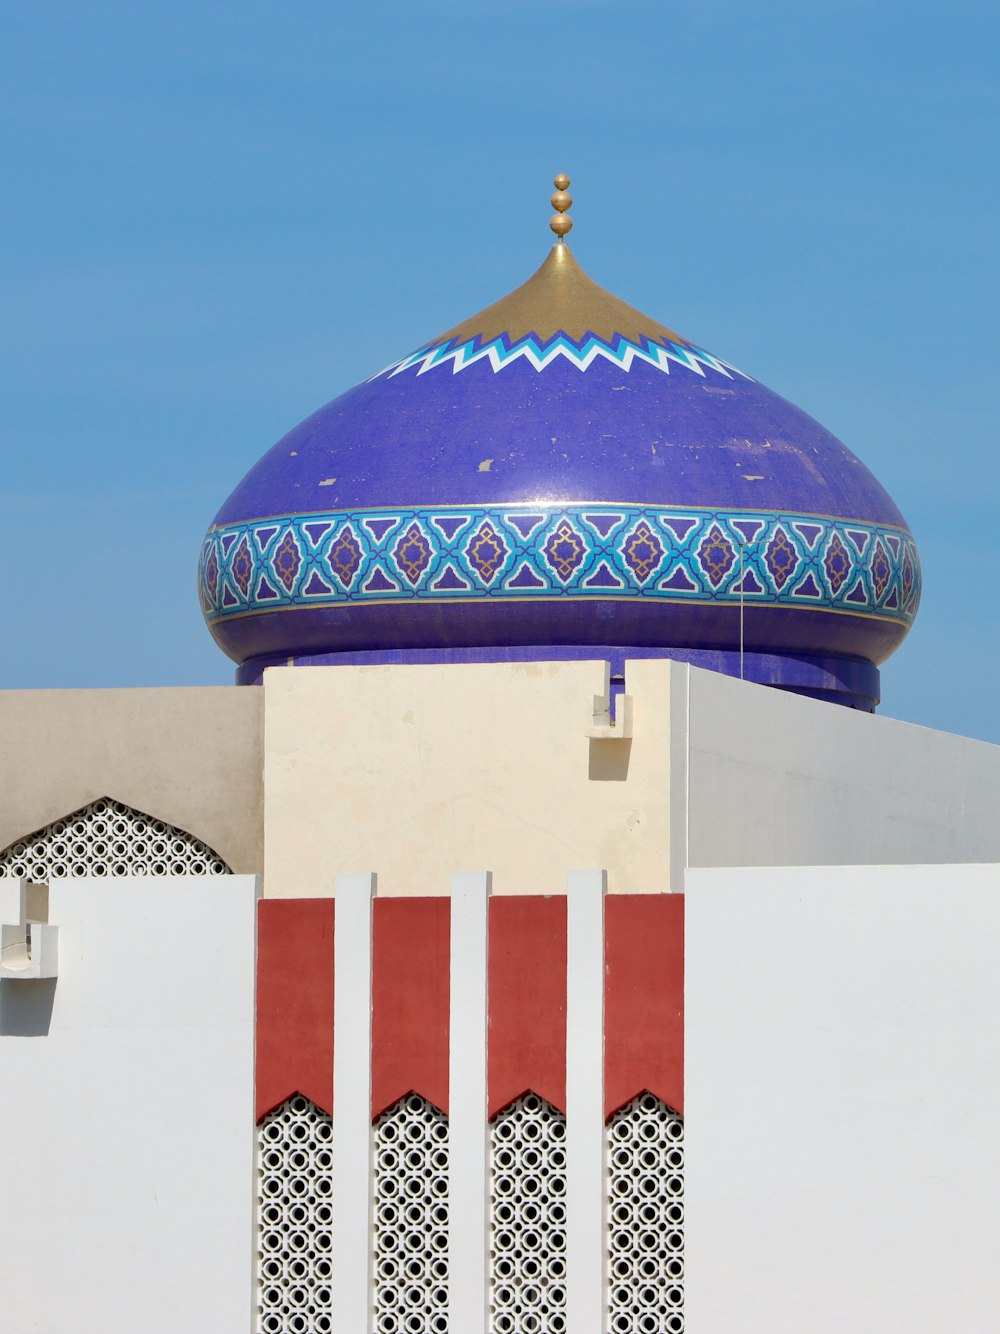 a large blue dome on top of a building